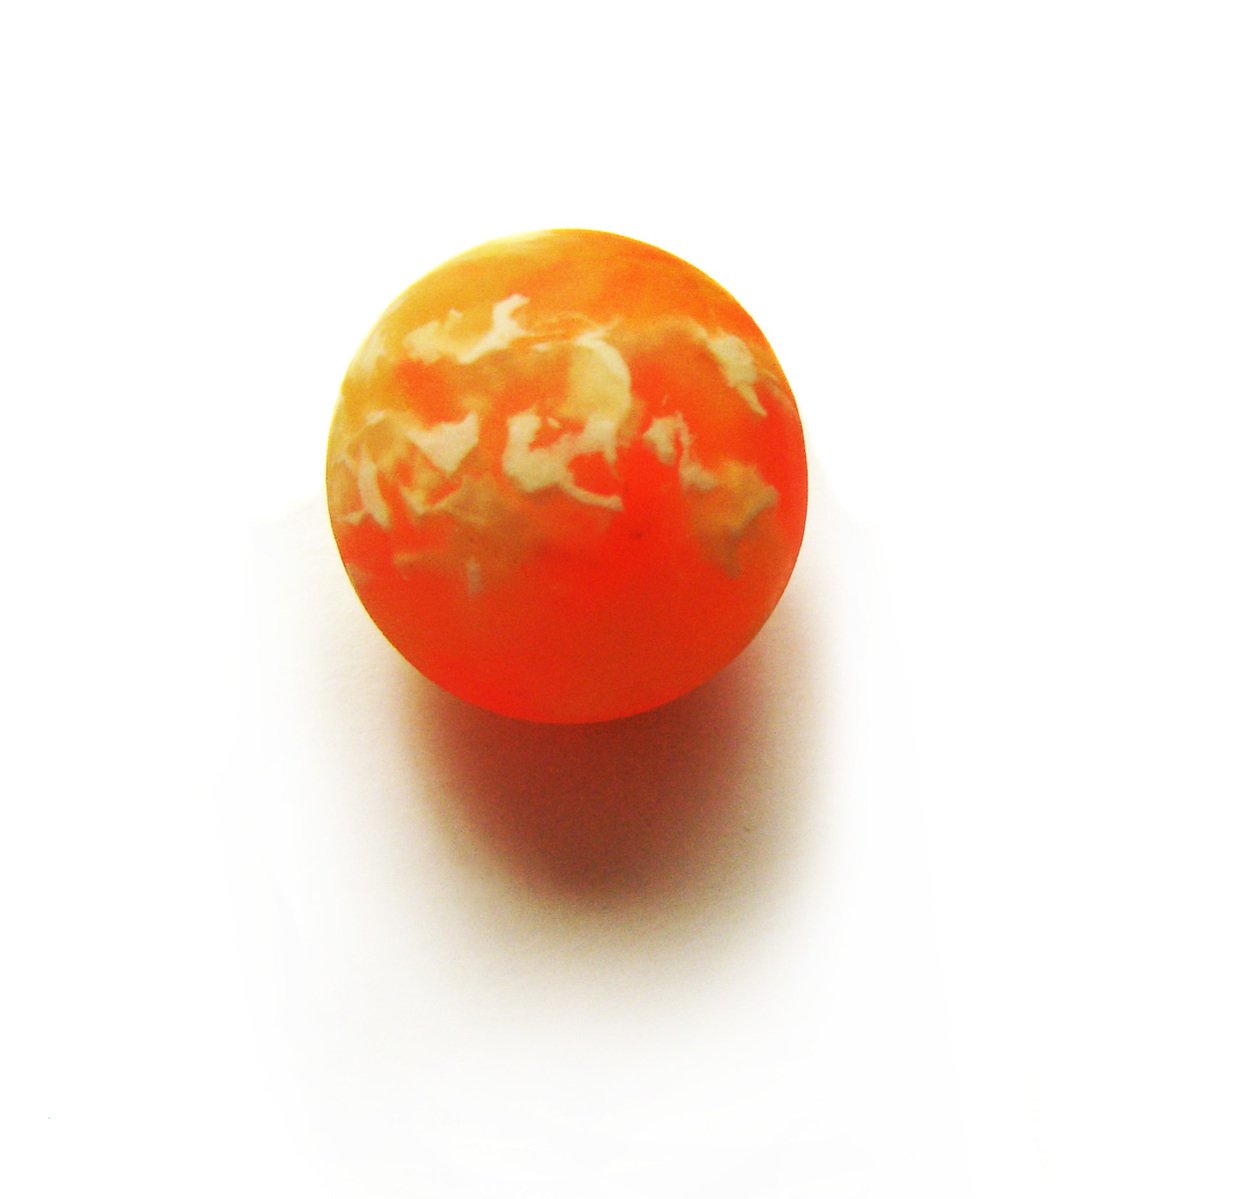 an orange piece of fruit on a white surface